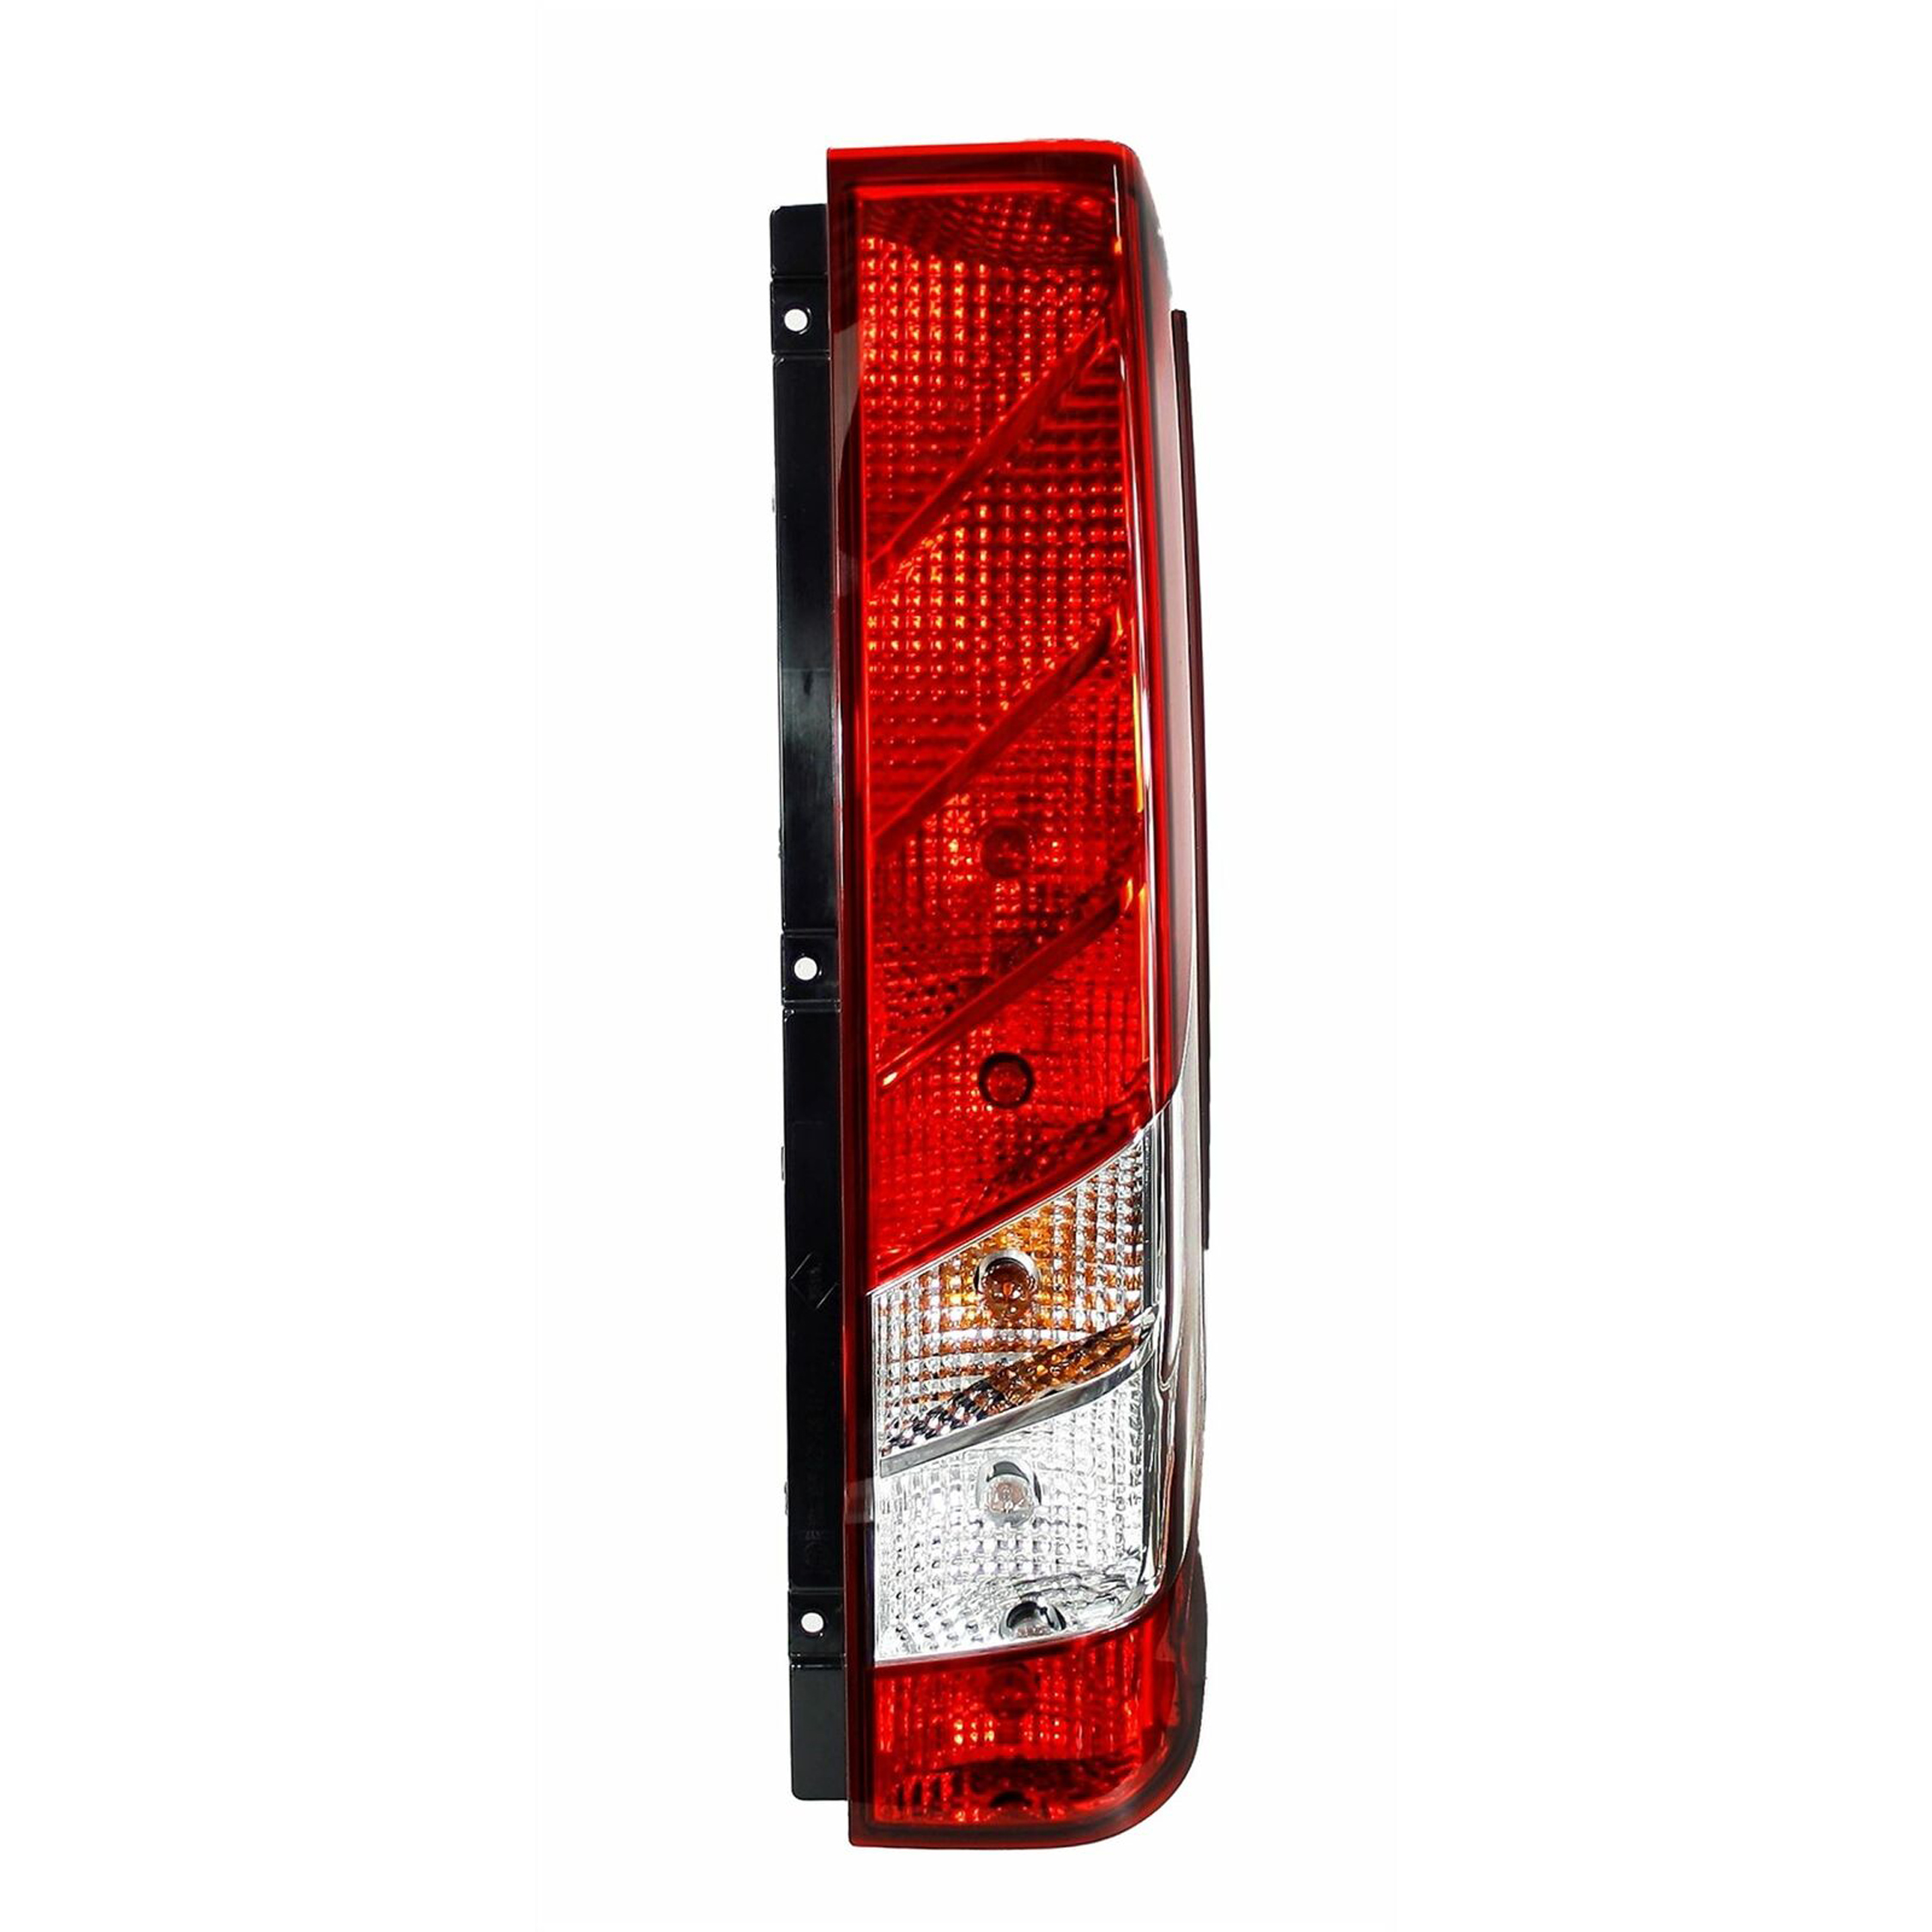 IVECO Daily VAN REAR LAMP LIGHT RIGHT HAND ( UK Driver Side ) 2015 to 2020 – REAR LAMP LIGHT